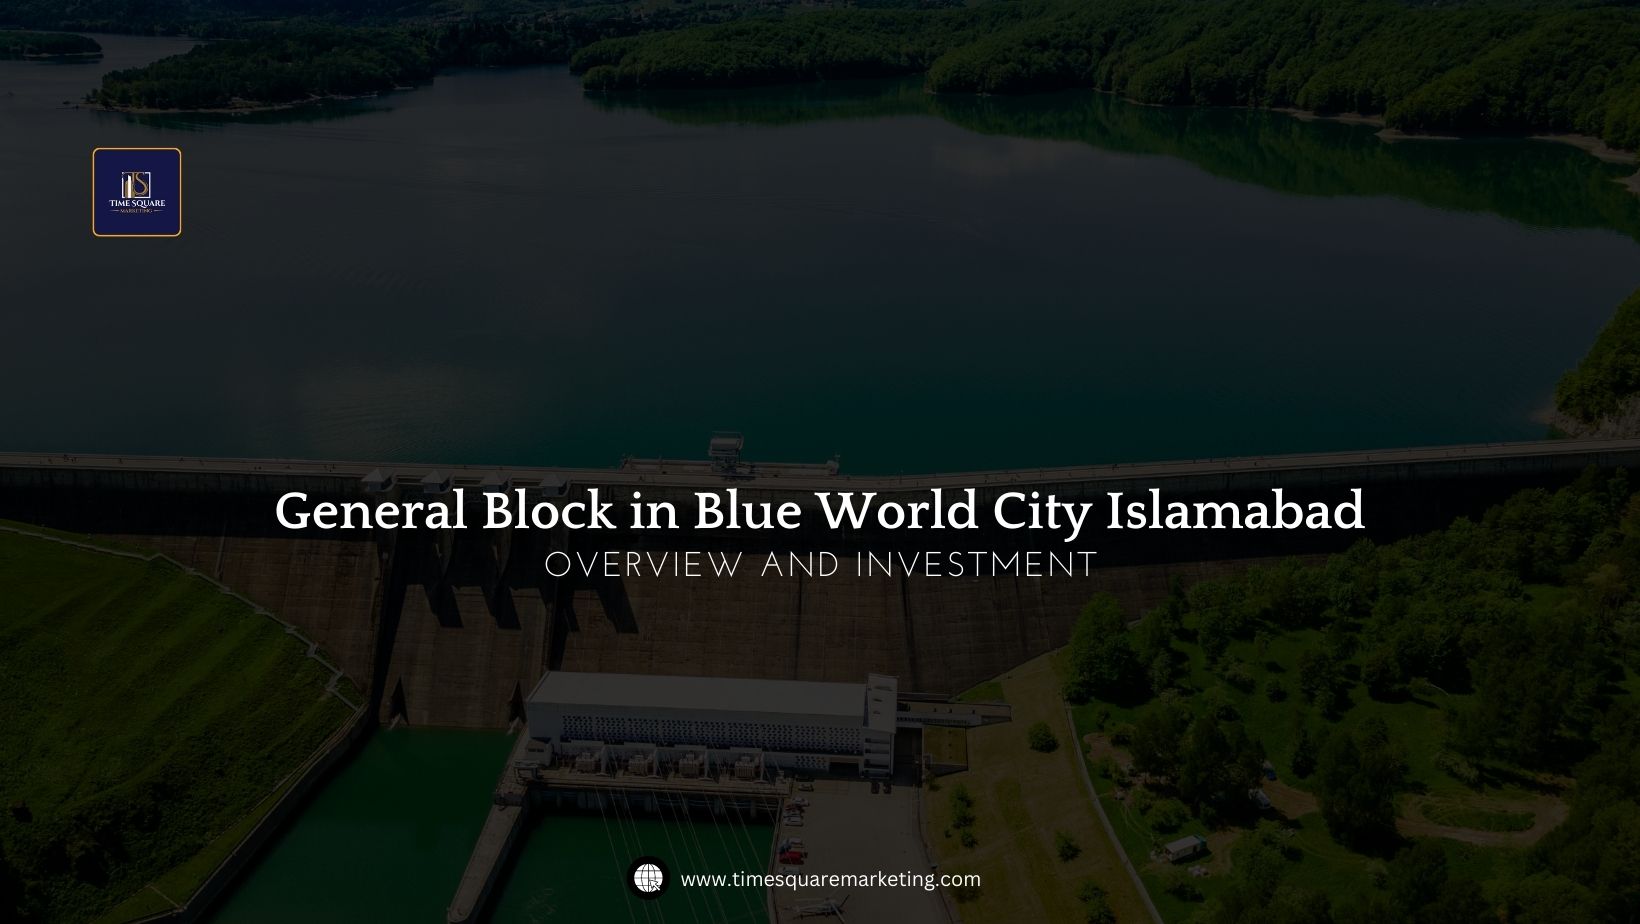 General Block in Blue World City Islamabad Overview and Investment